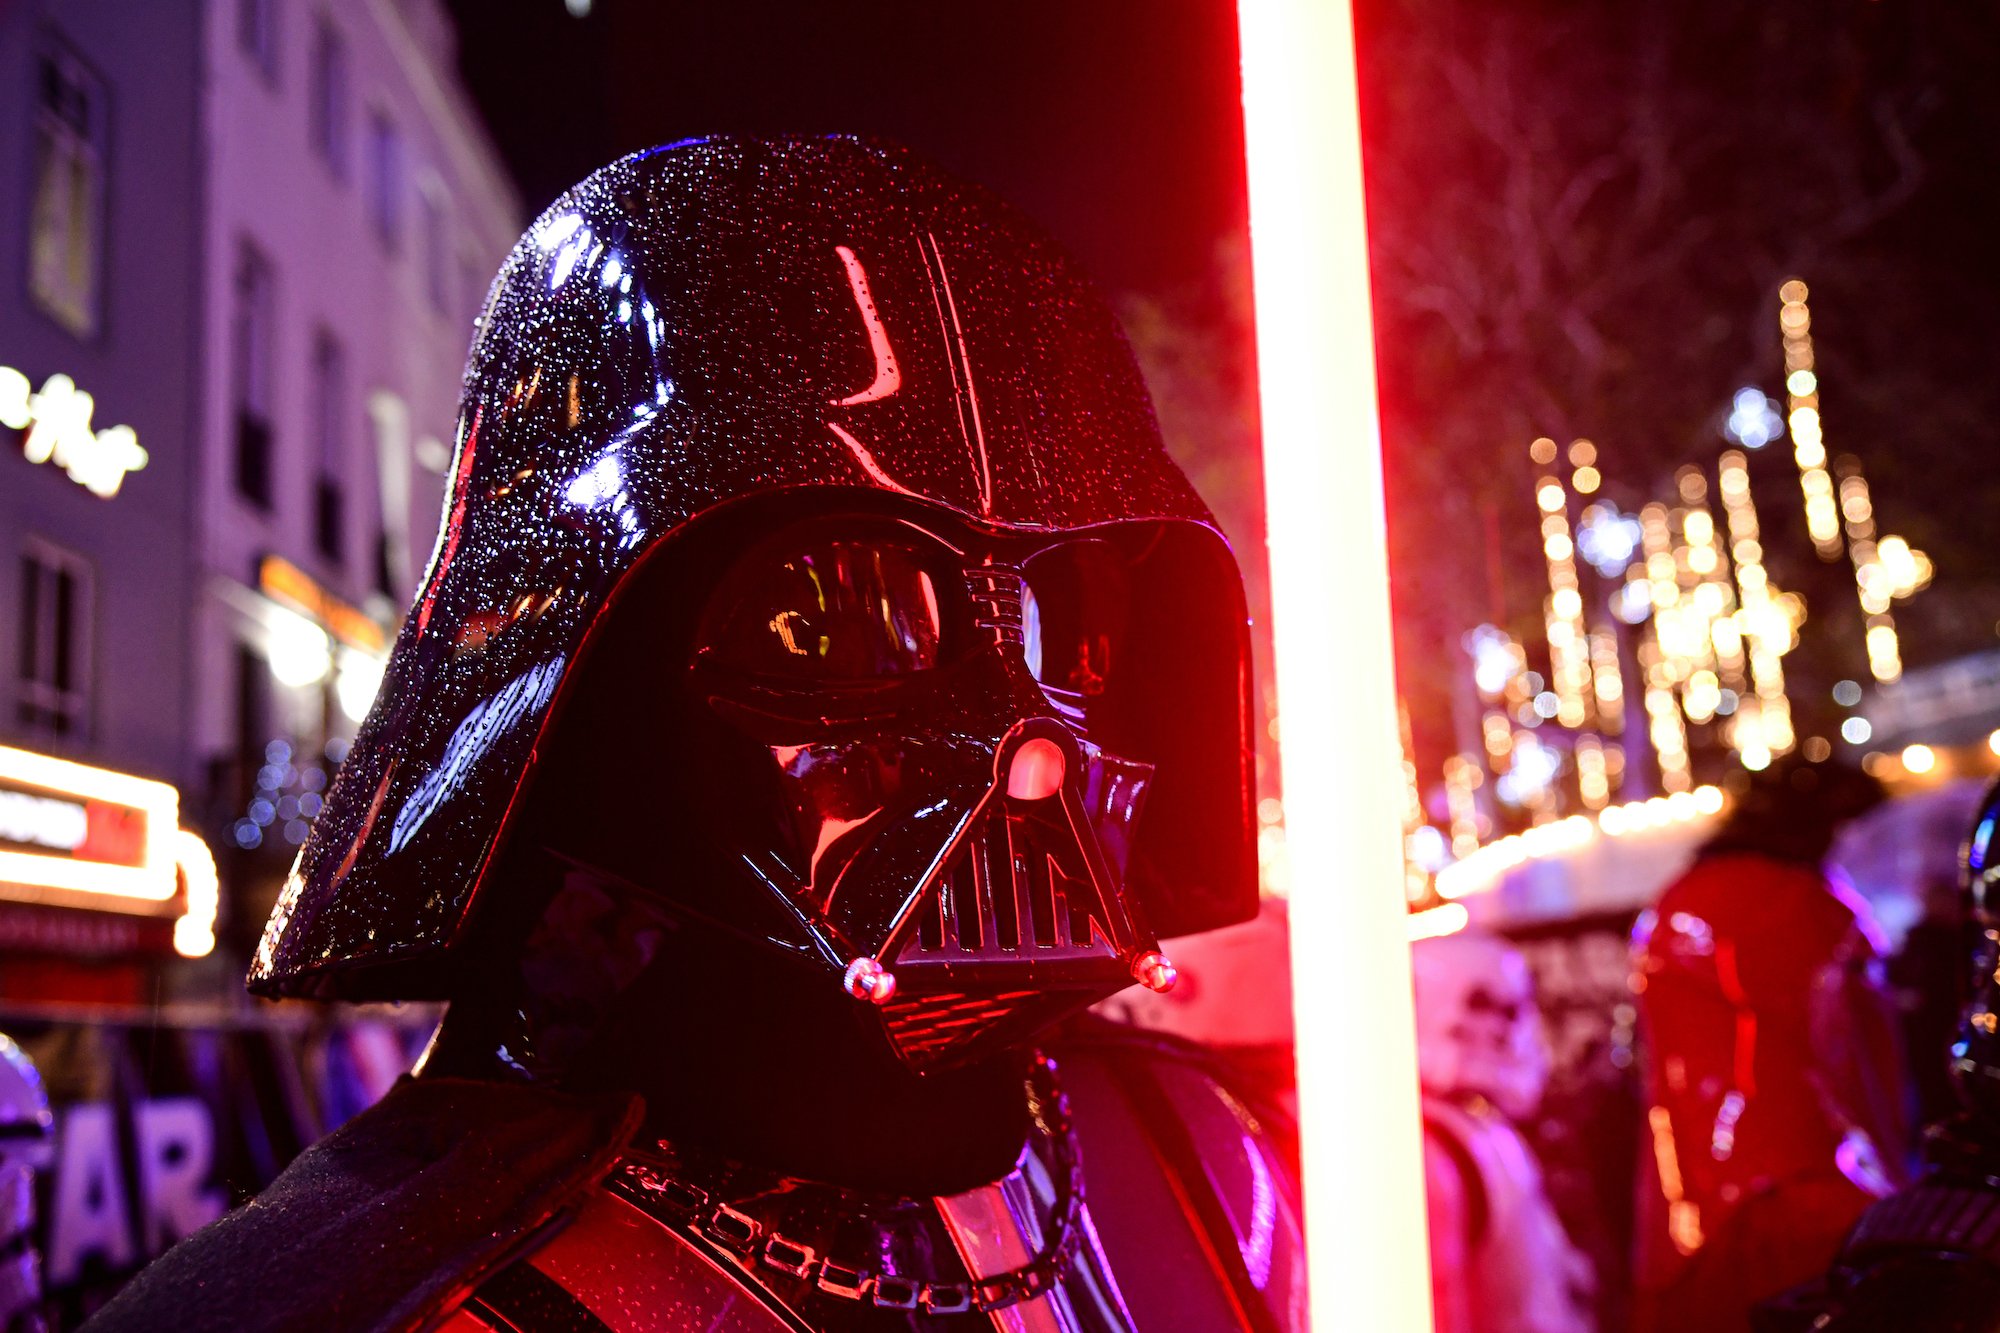 Darth Vader with a lightsaber at the 'Star Wars: The Rise of Skywalker' premiere